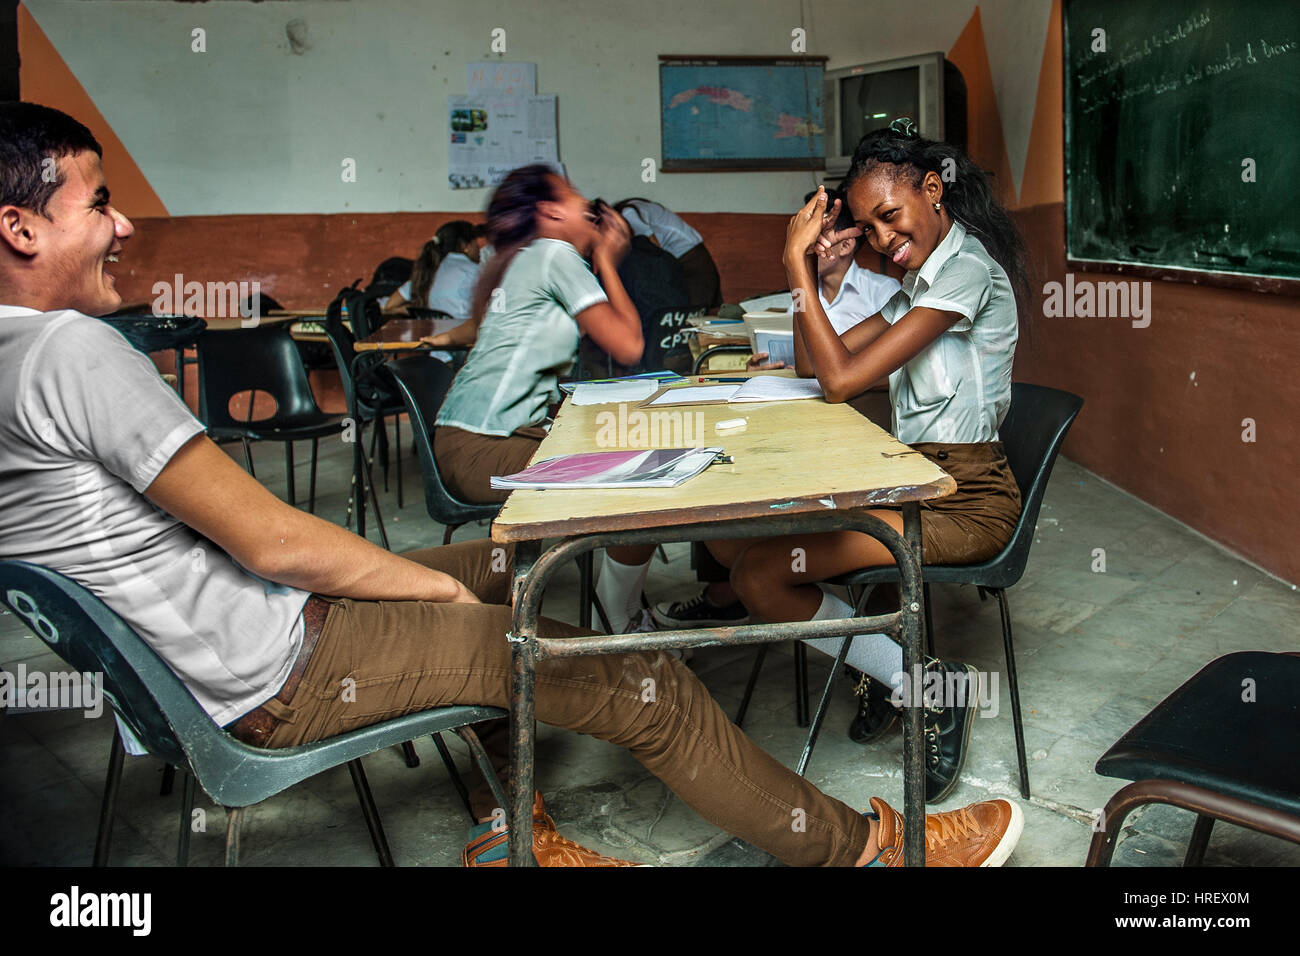 Students in a class delighting during the playtime, Trinidad, Cuba Stock Photo